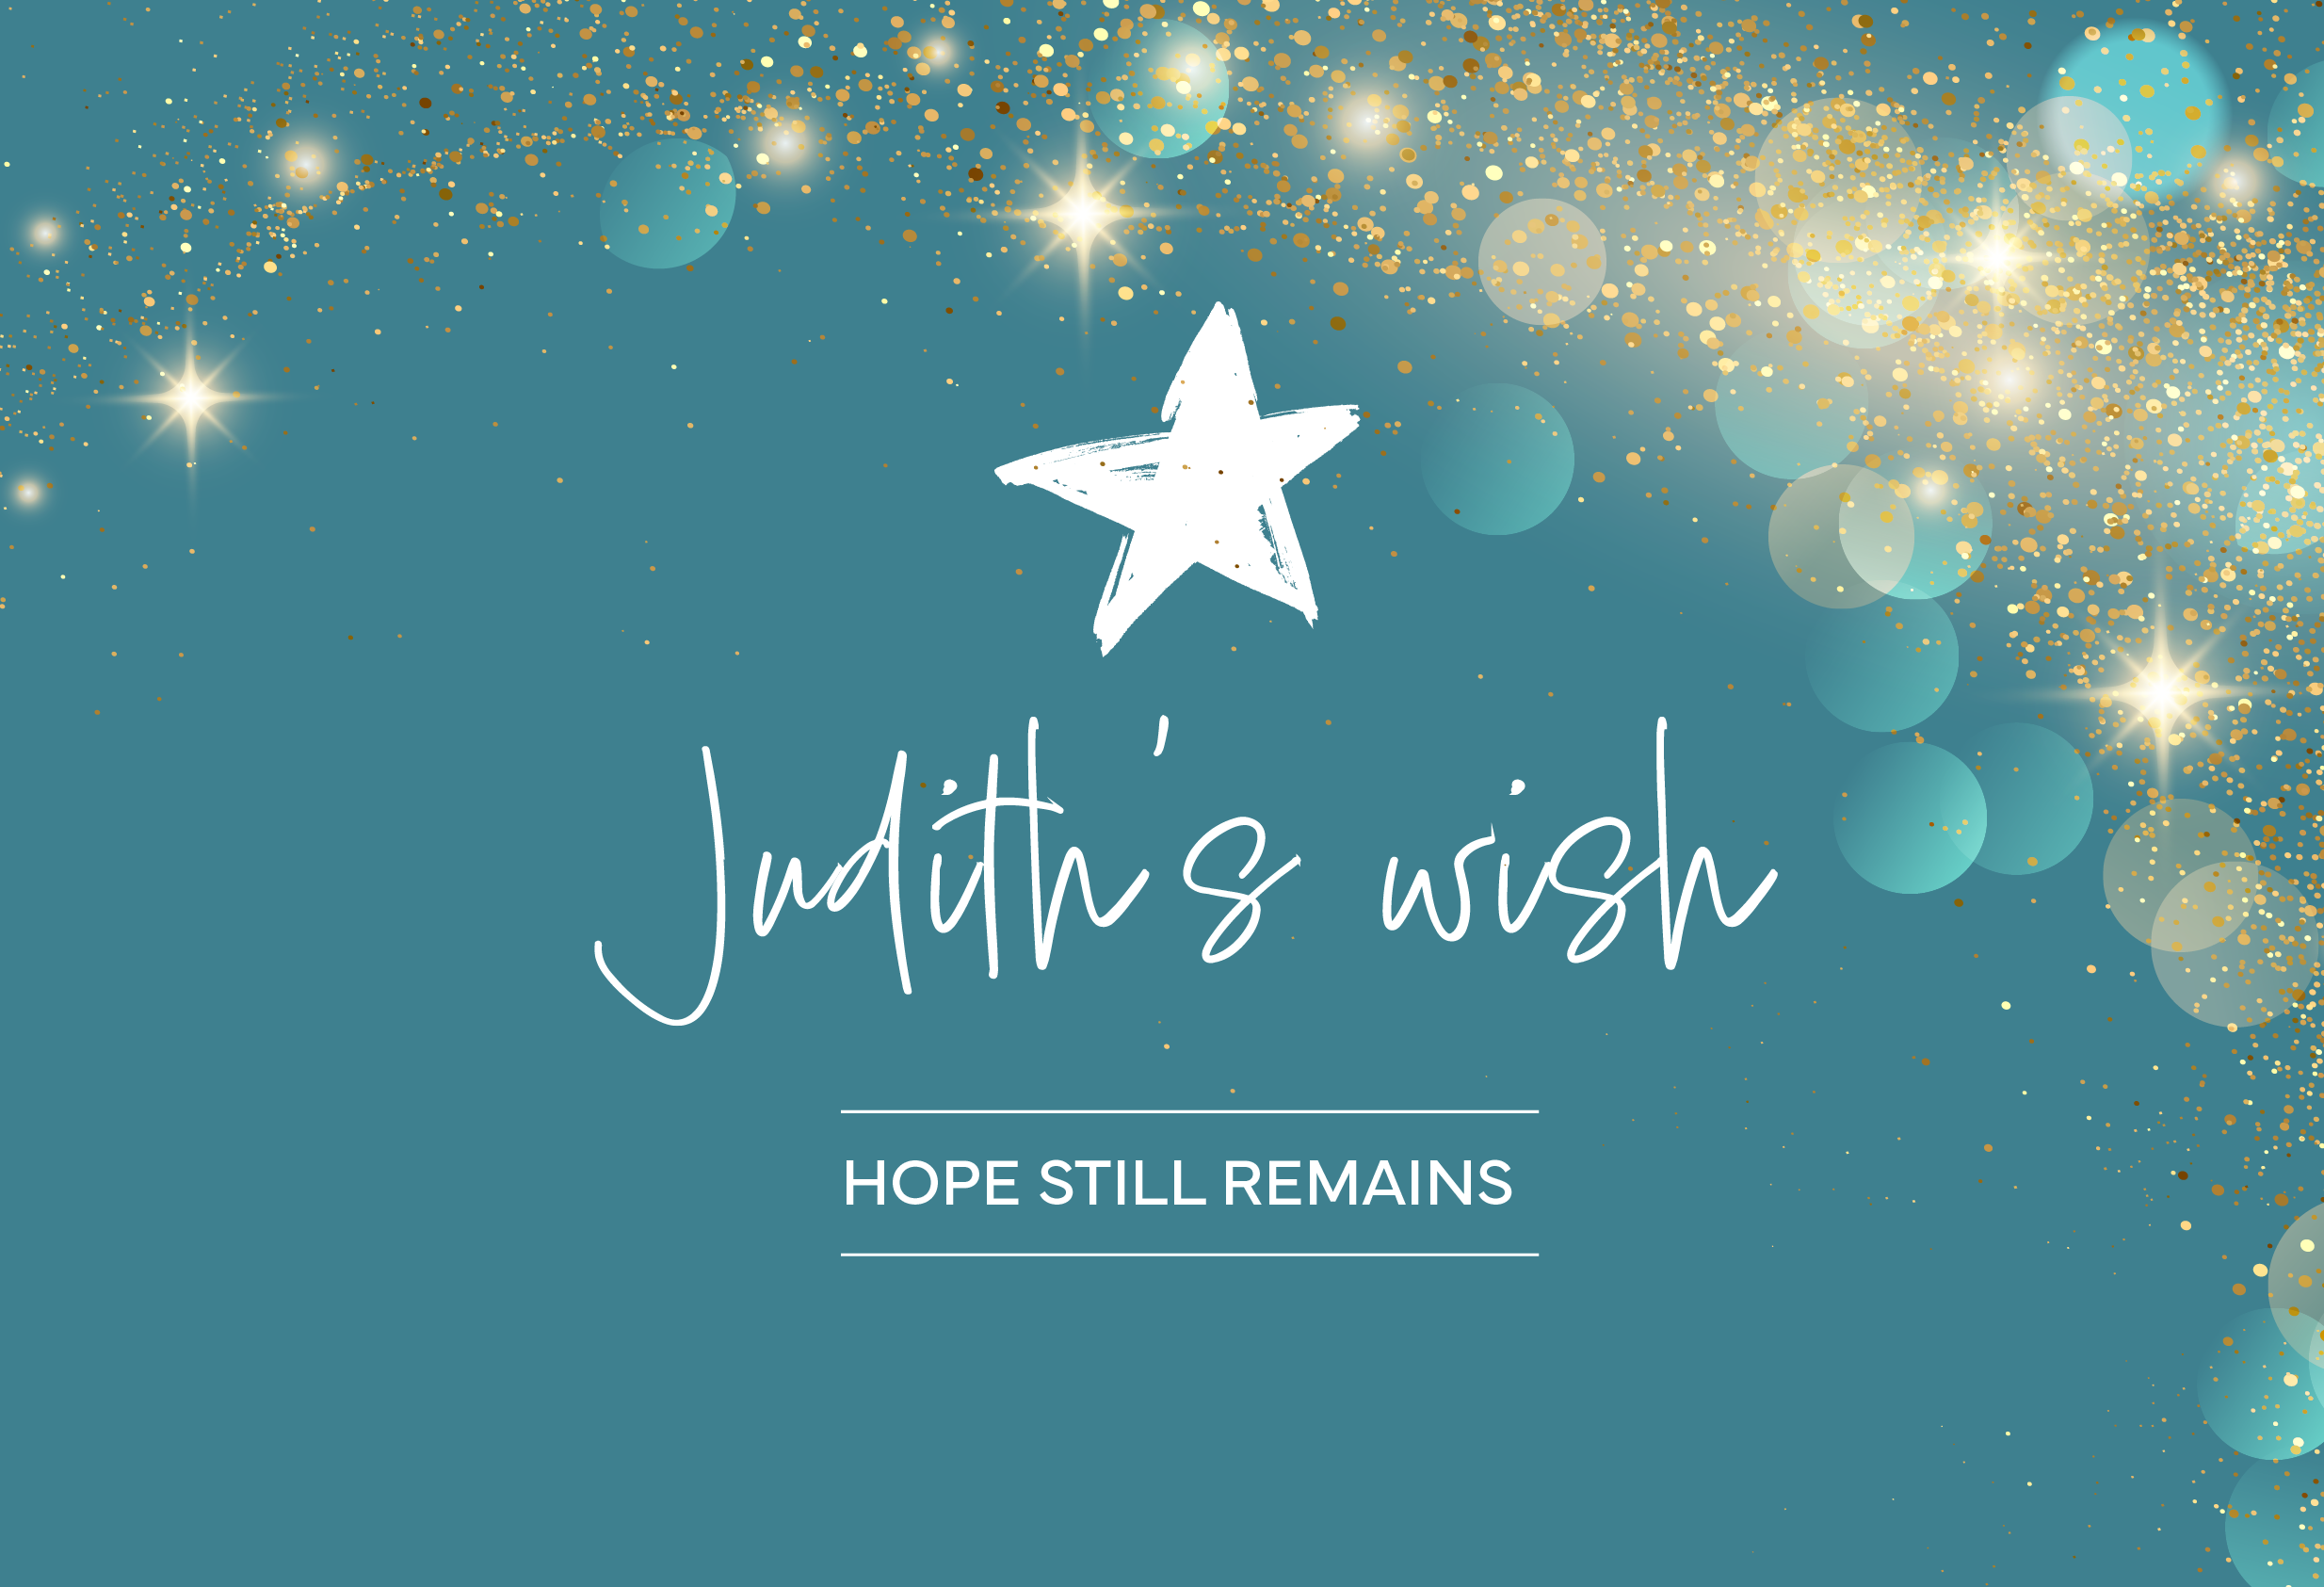 Support Judith's Wish this Easter